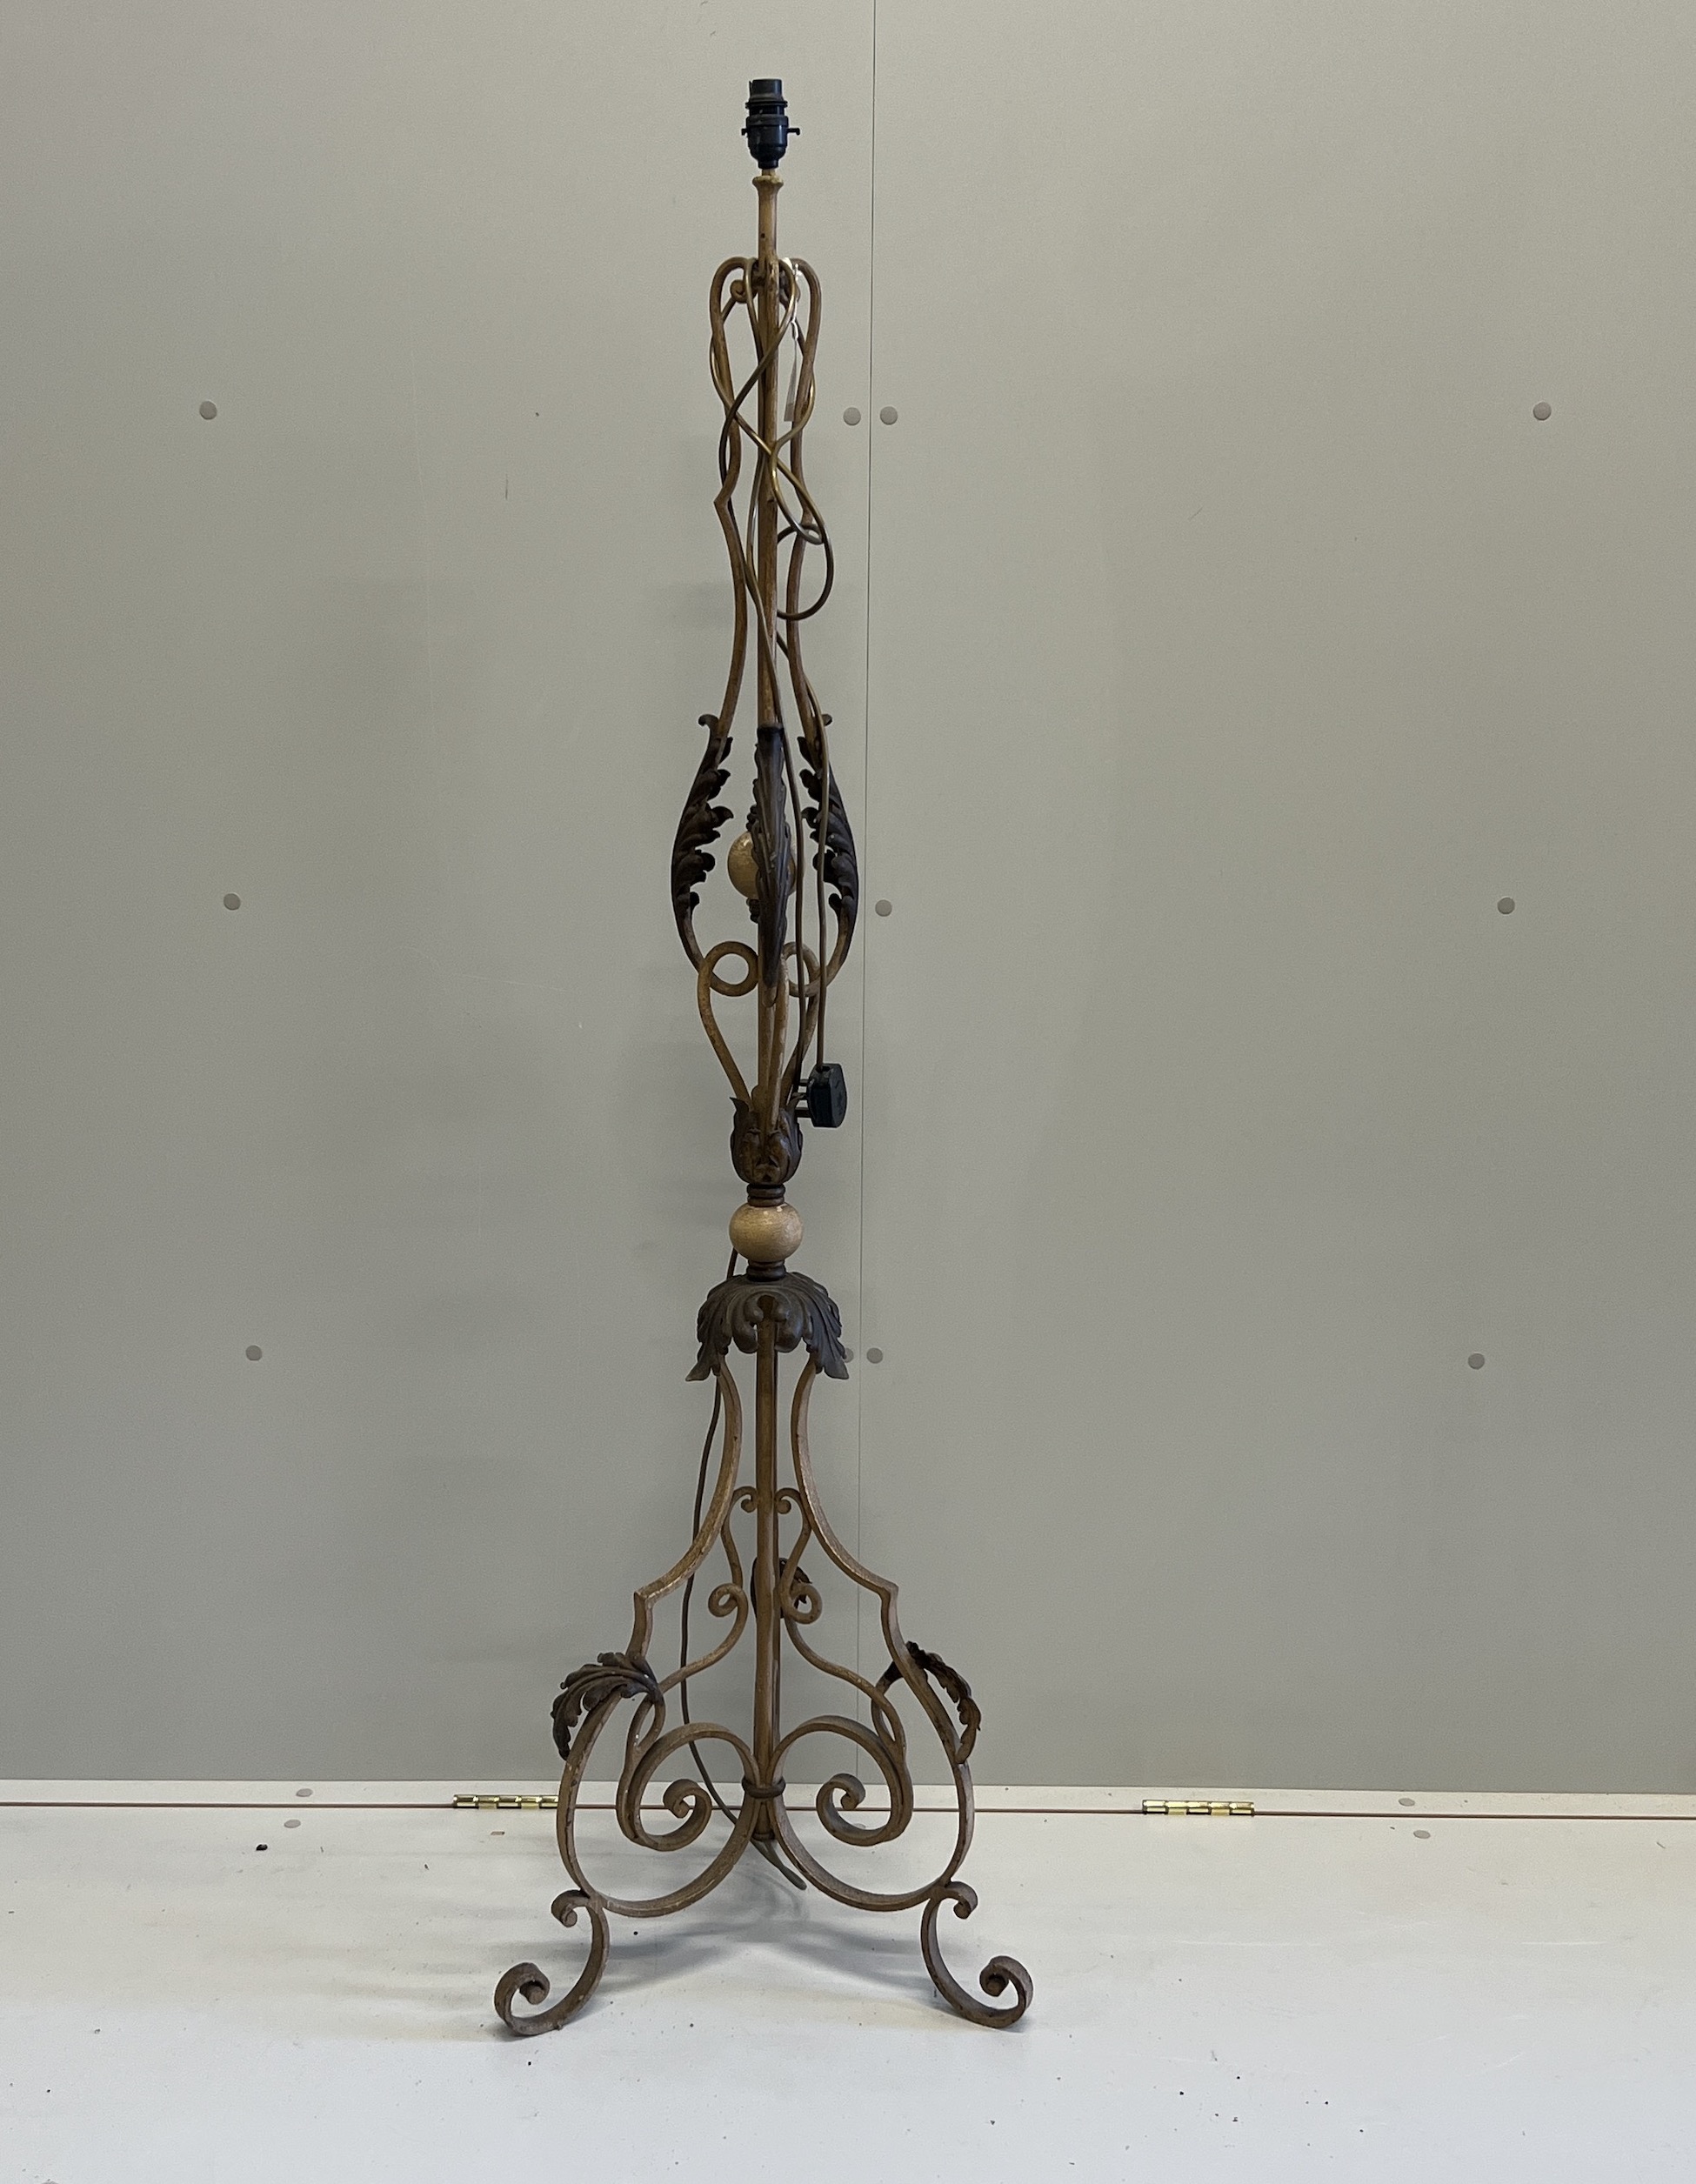 An early 20th century French wrought iron telescopic standard lamp